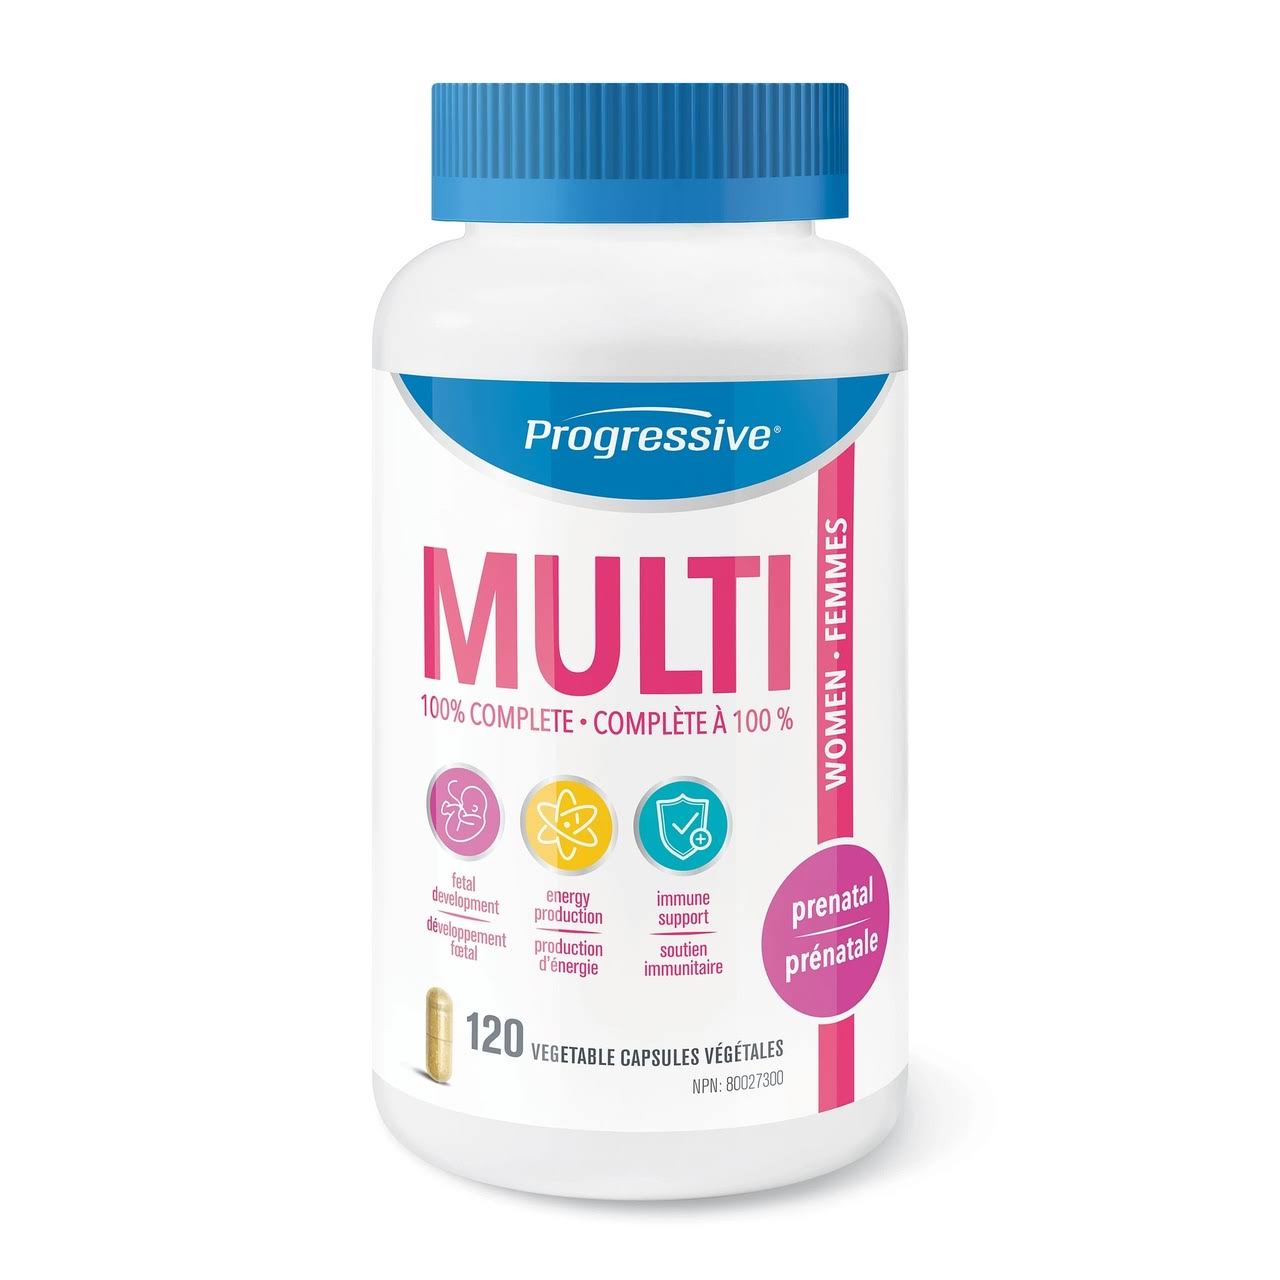 Progressive Nutritional Multivitamins and Mineral Supplement - 120 Capsules